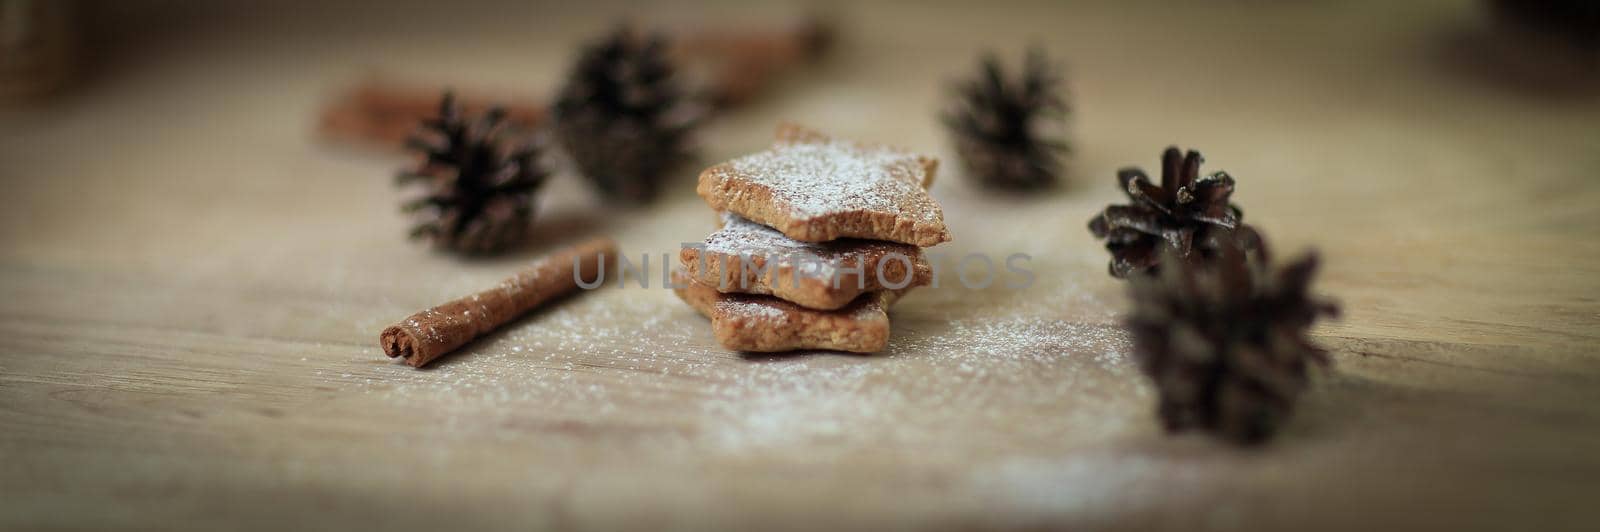 Christmas table. blurred image homemade cookies on wooden background.photo with copy space.